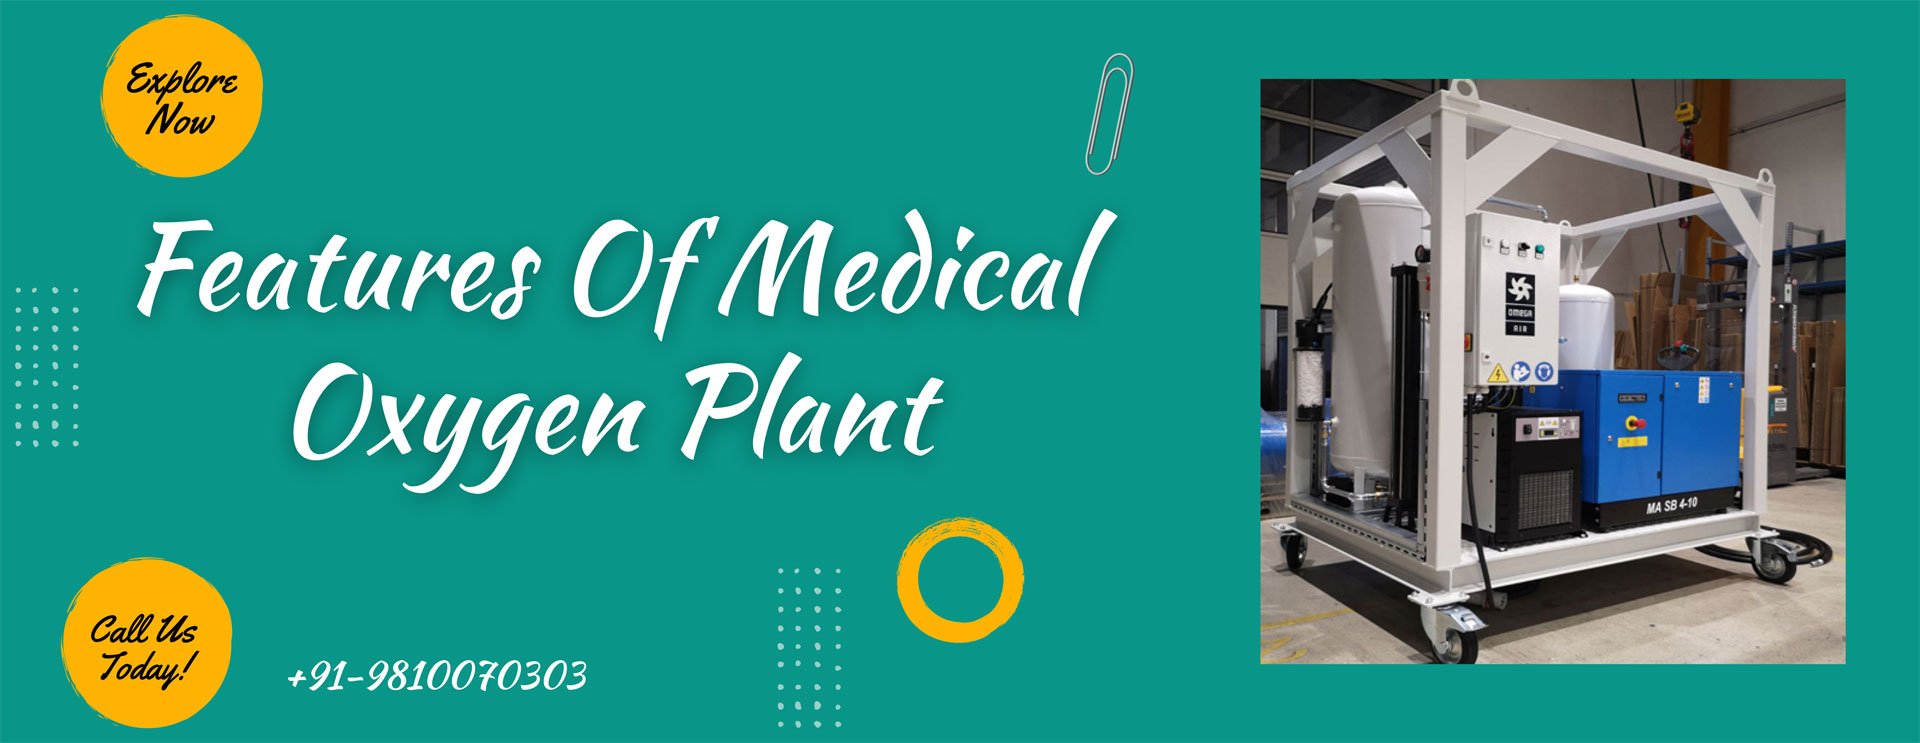 Features Of Medical Oxygen Plant